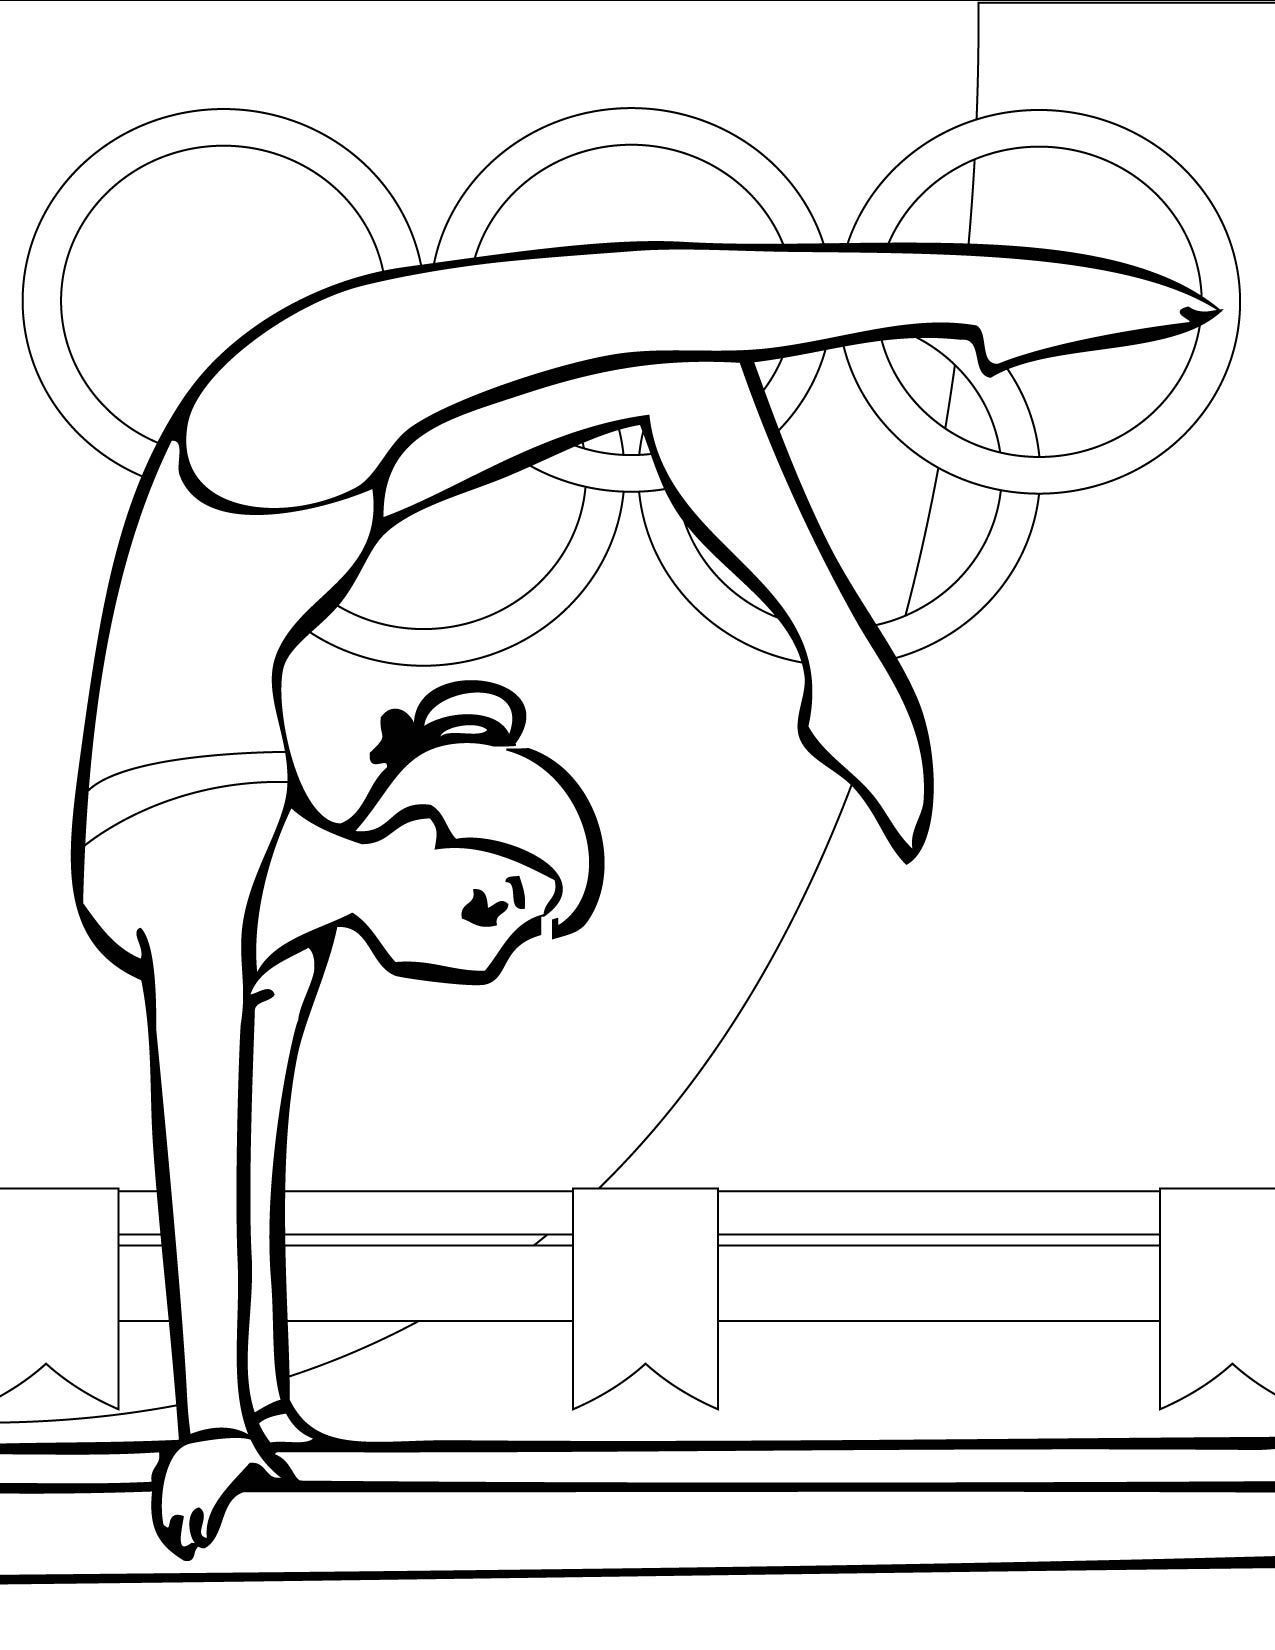 All Gymnastics Coloring Pages - Coloring Pages For All Ages